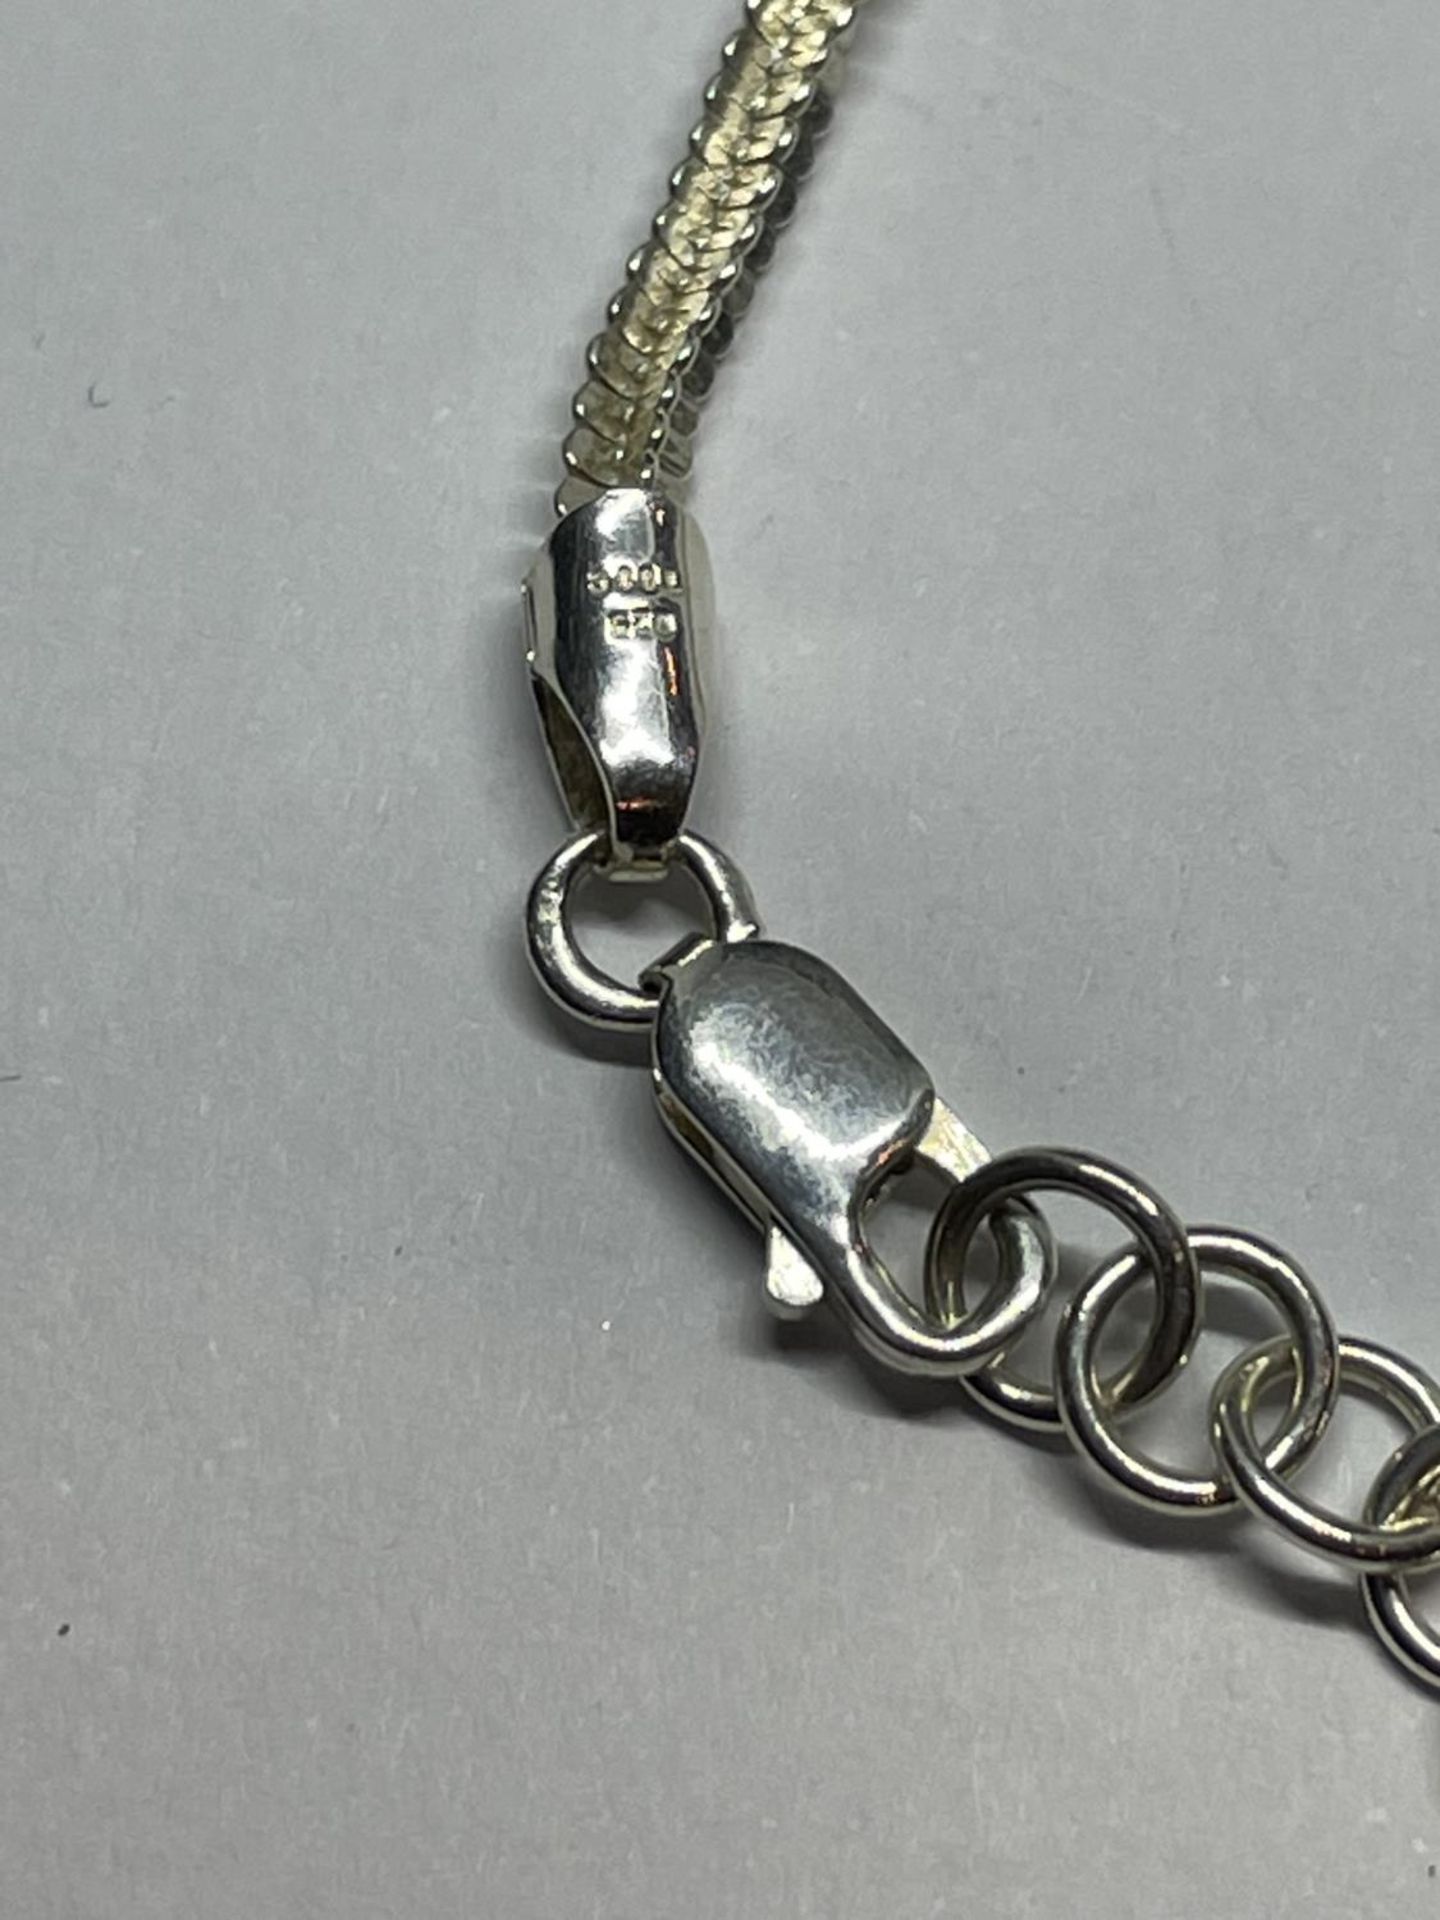 A LARGE HALLMARKED LONDON SILVER INGOT ON A MARKED 925 SILVER CHAIN - Image 3 of 3